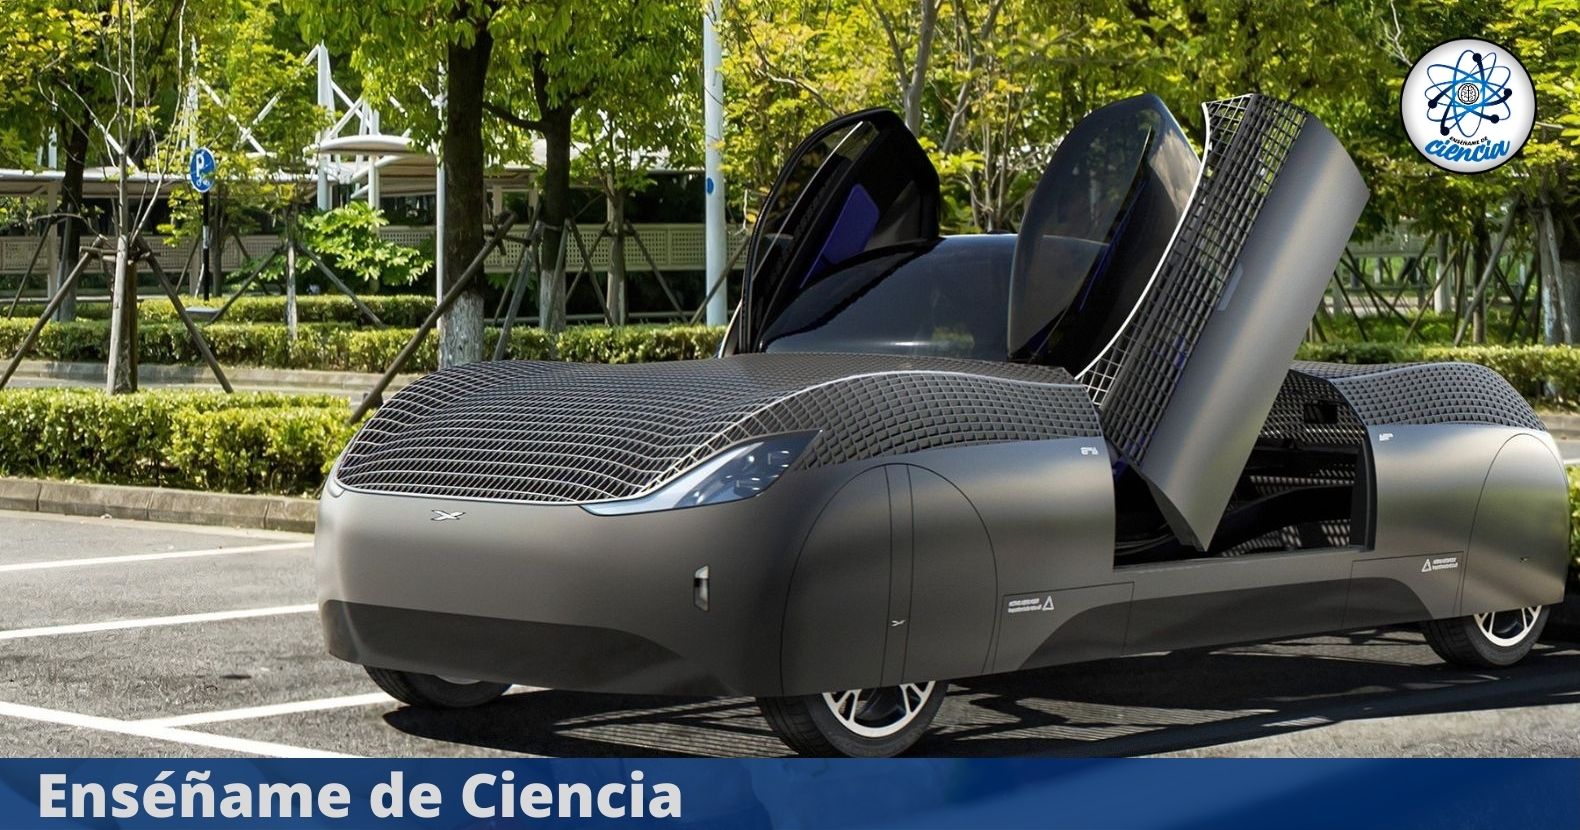 This is Alf, the first flying car to be circulated in the United States soon – Enseñame de Ciencia